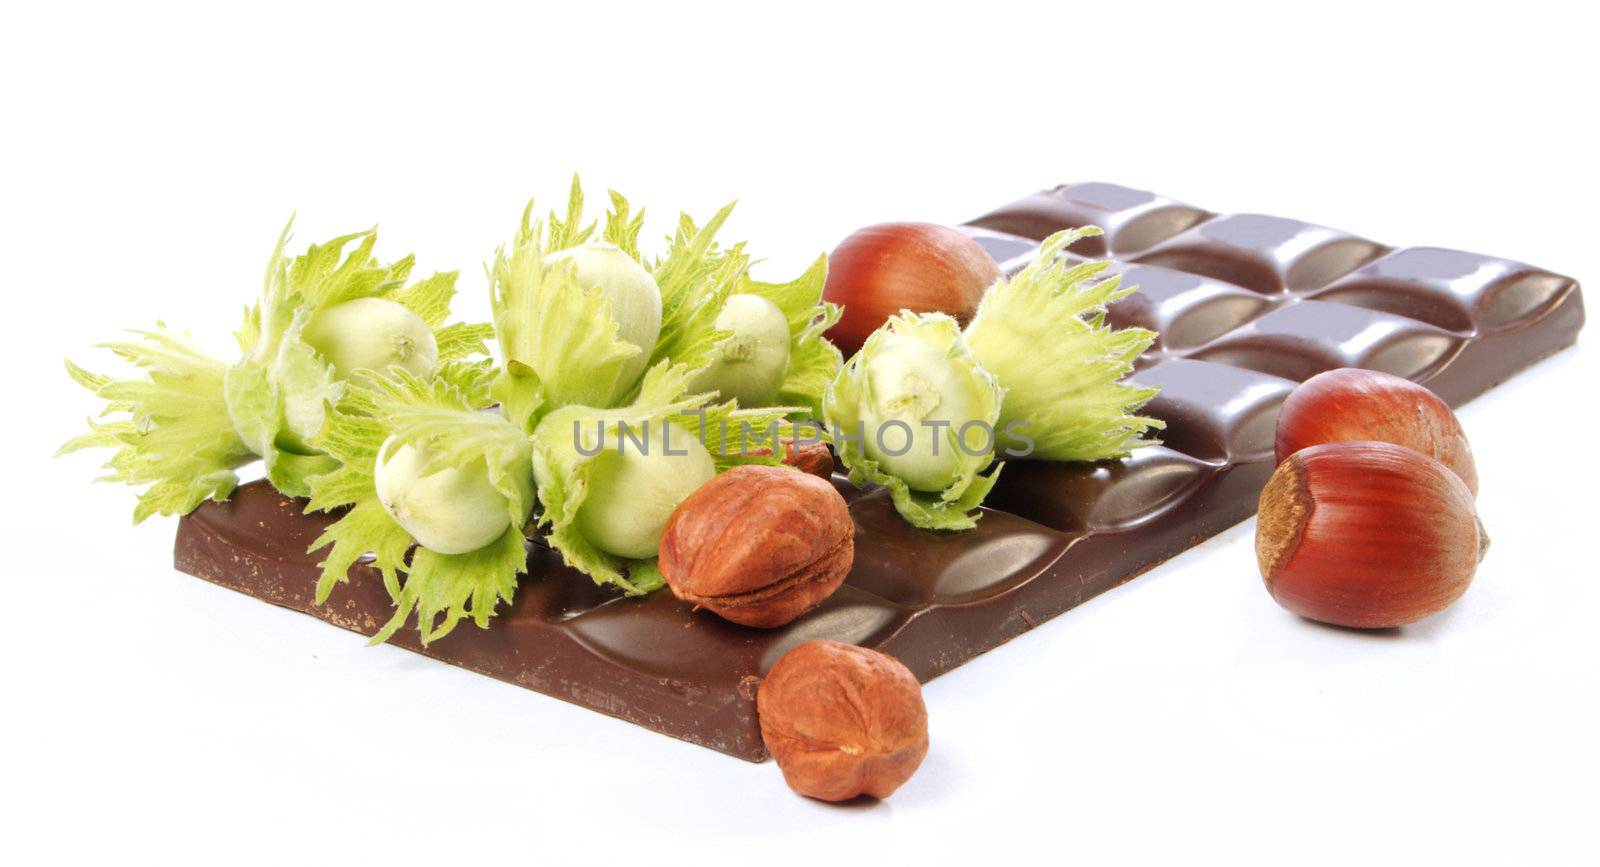 Piece of chocolate and wood nuts on a white background